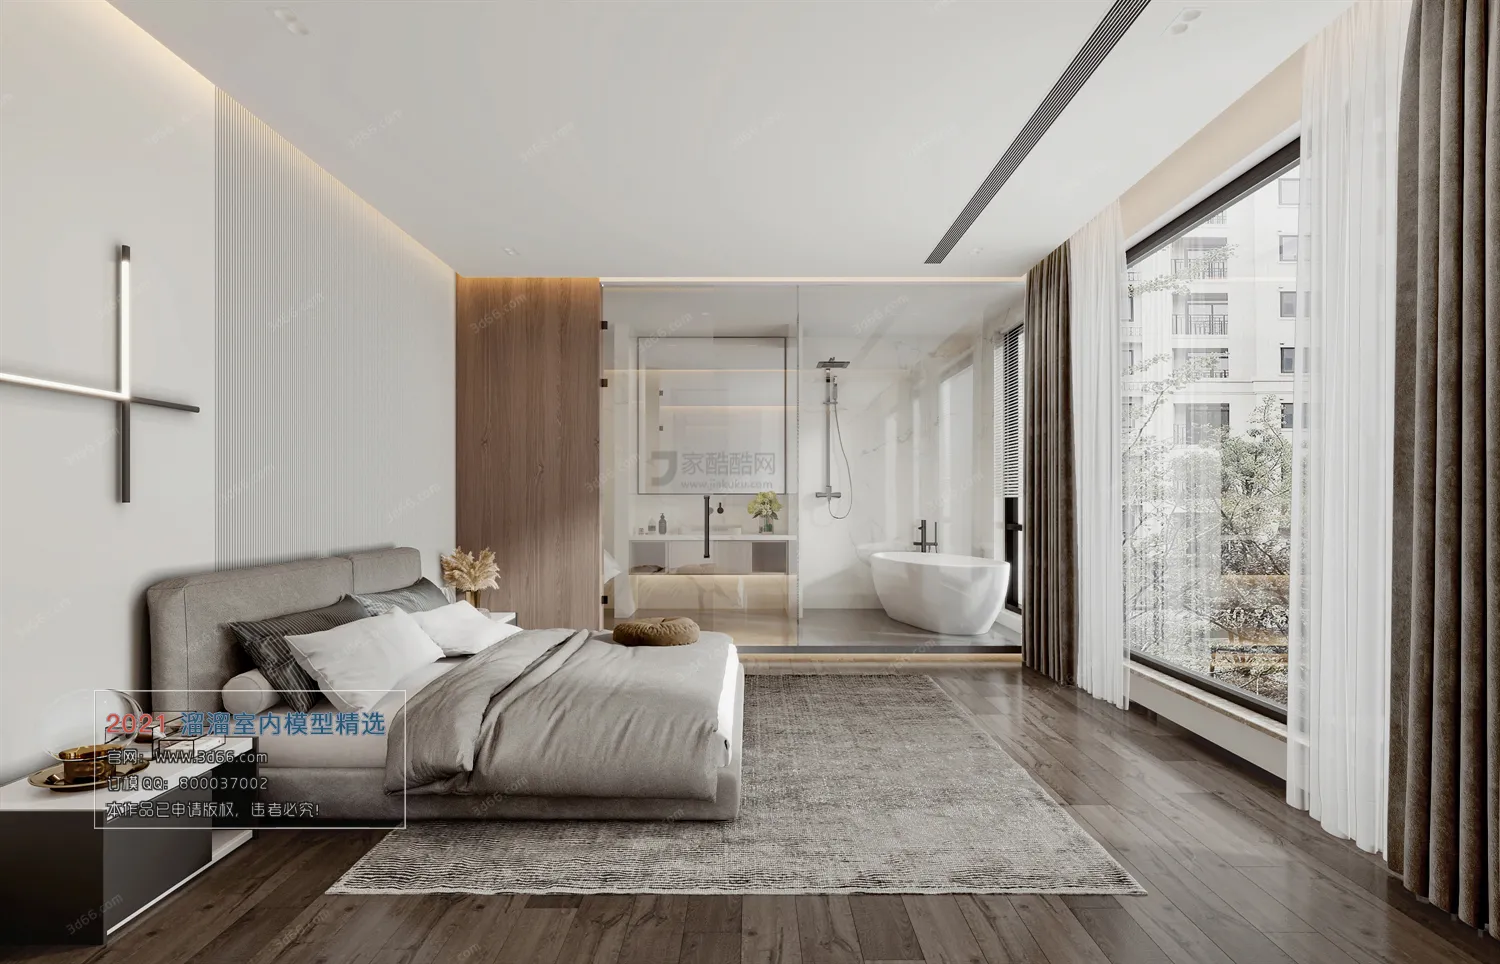 HOTEL SUITE – A002-Modern style-Vray model